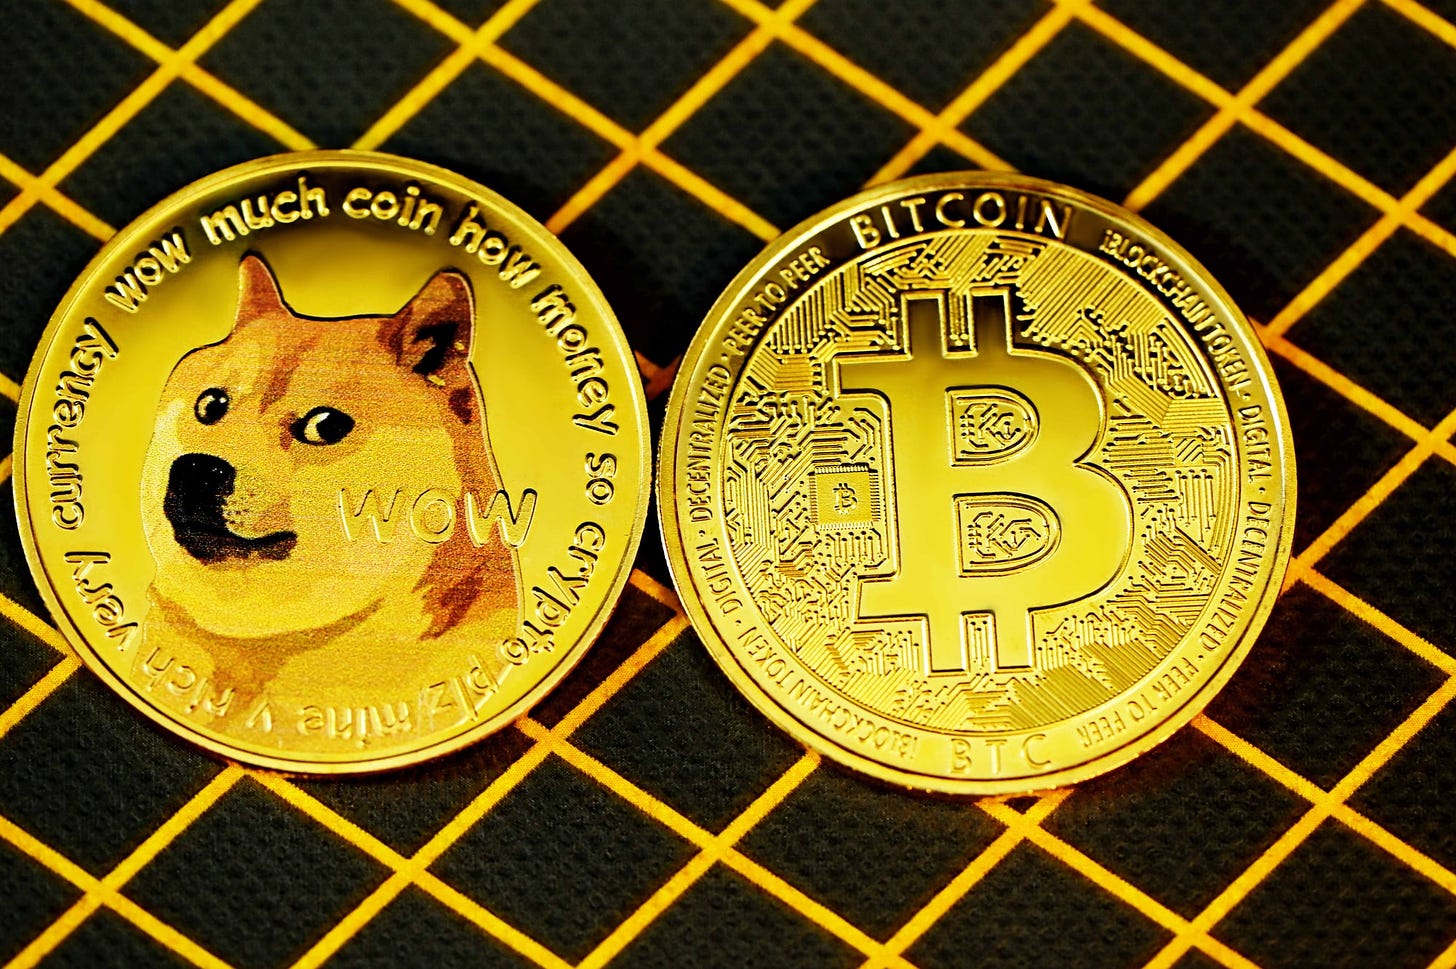 How I deduced Shiba Inu's (SHIB) 1000% rise two months earlier and how to apply this to other cryptocurrencies